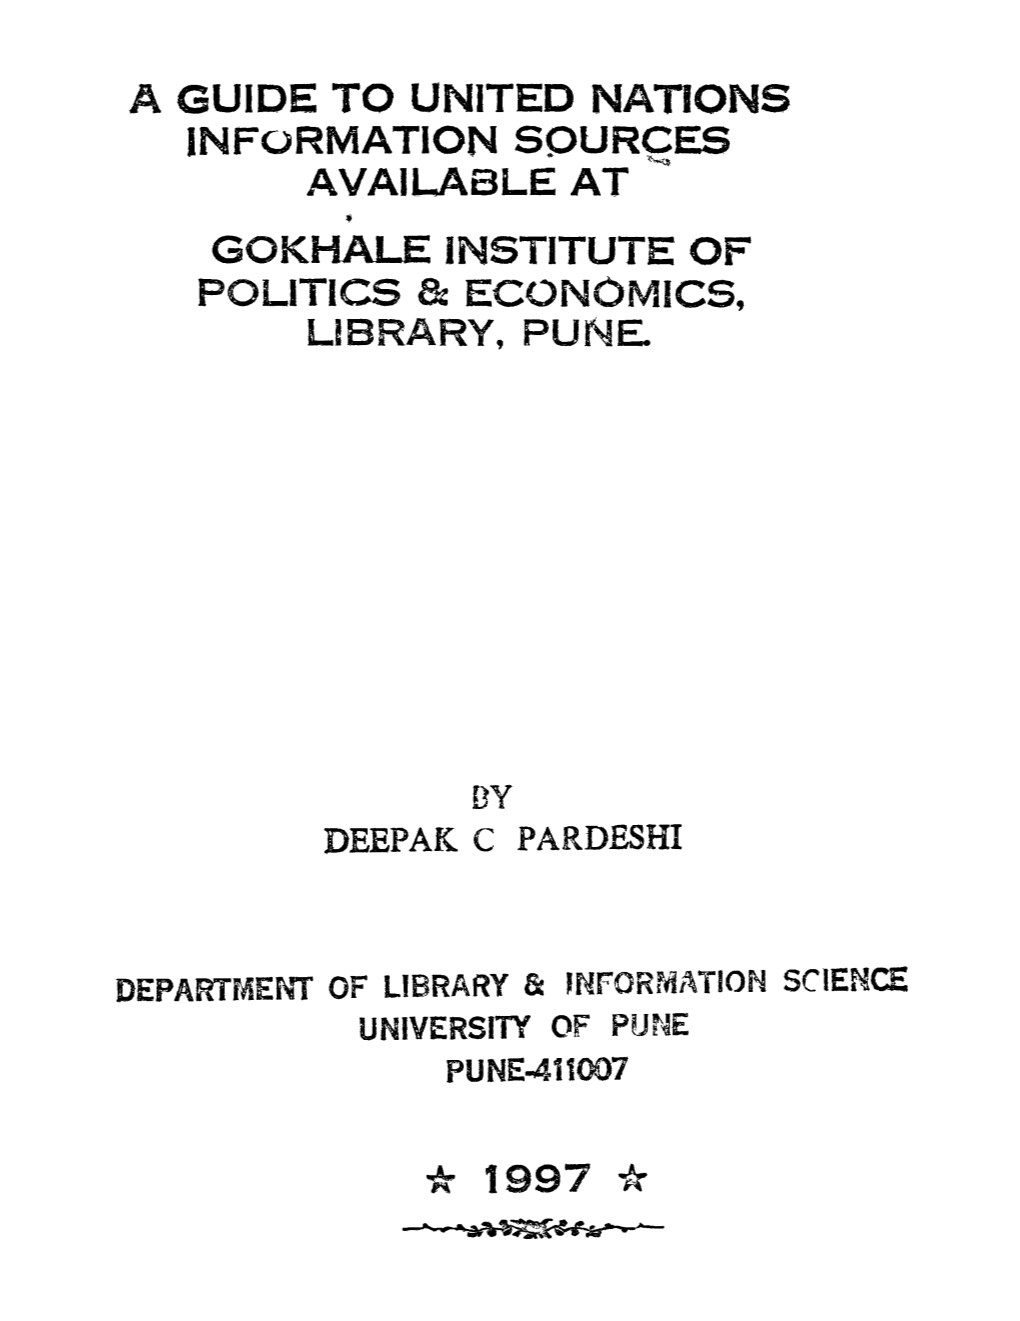 Available at • Gokhale Institute of Politics & Economics, Library, Pune